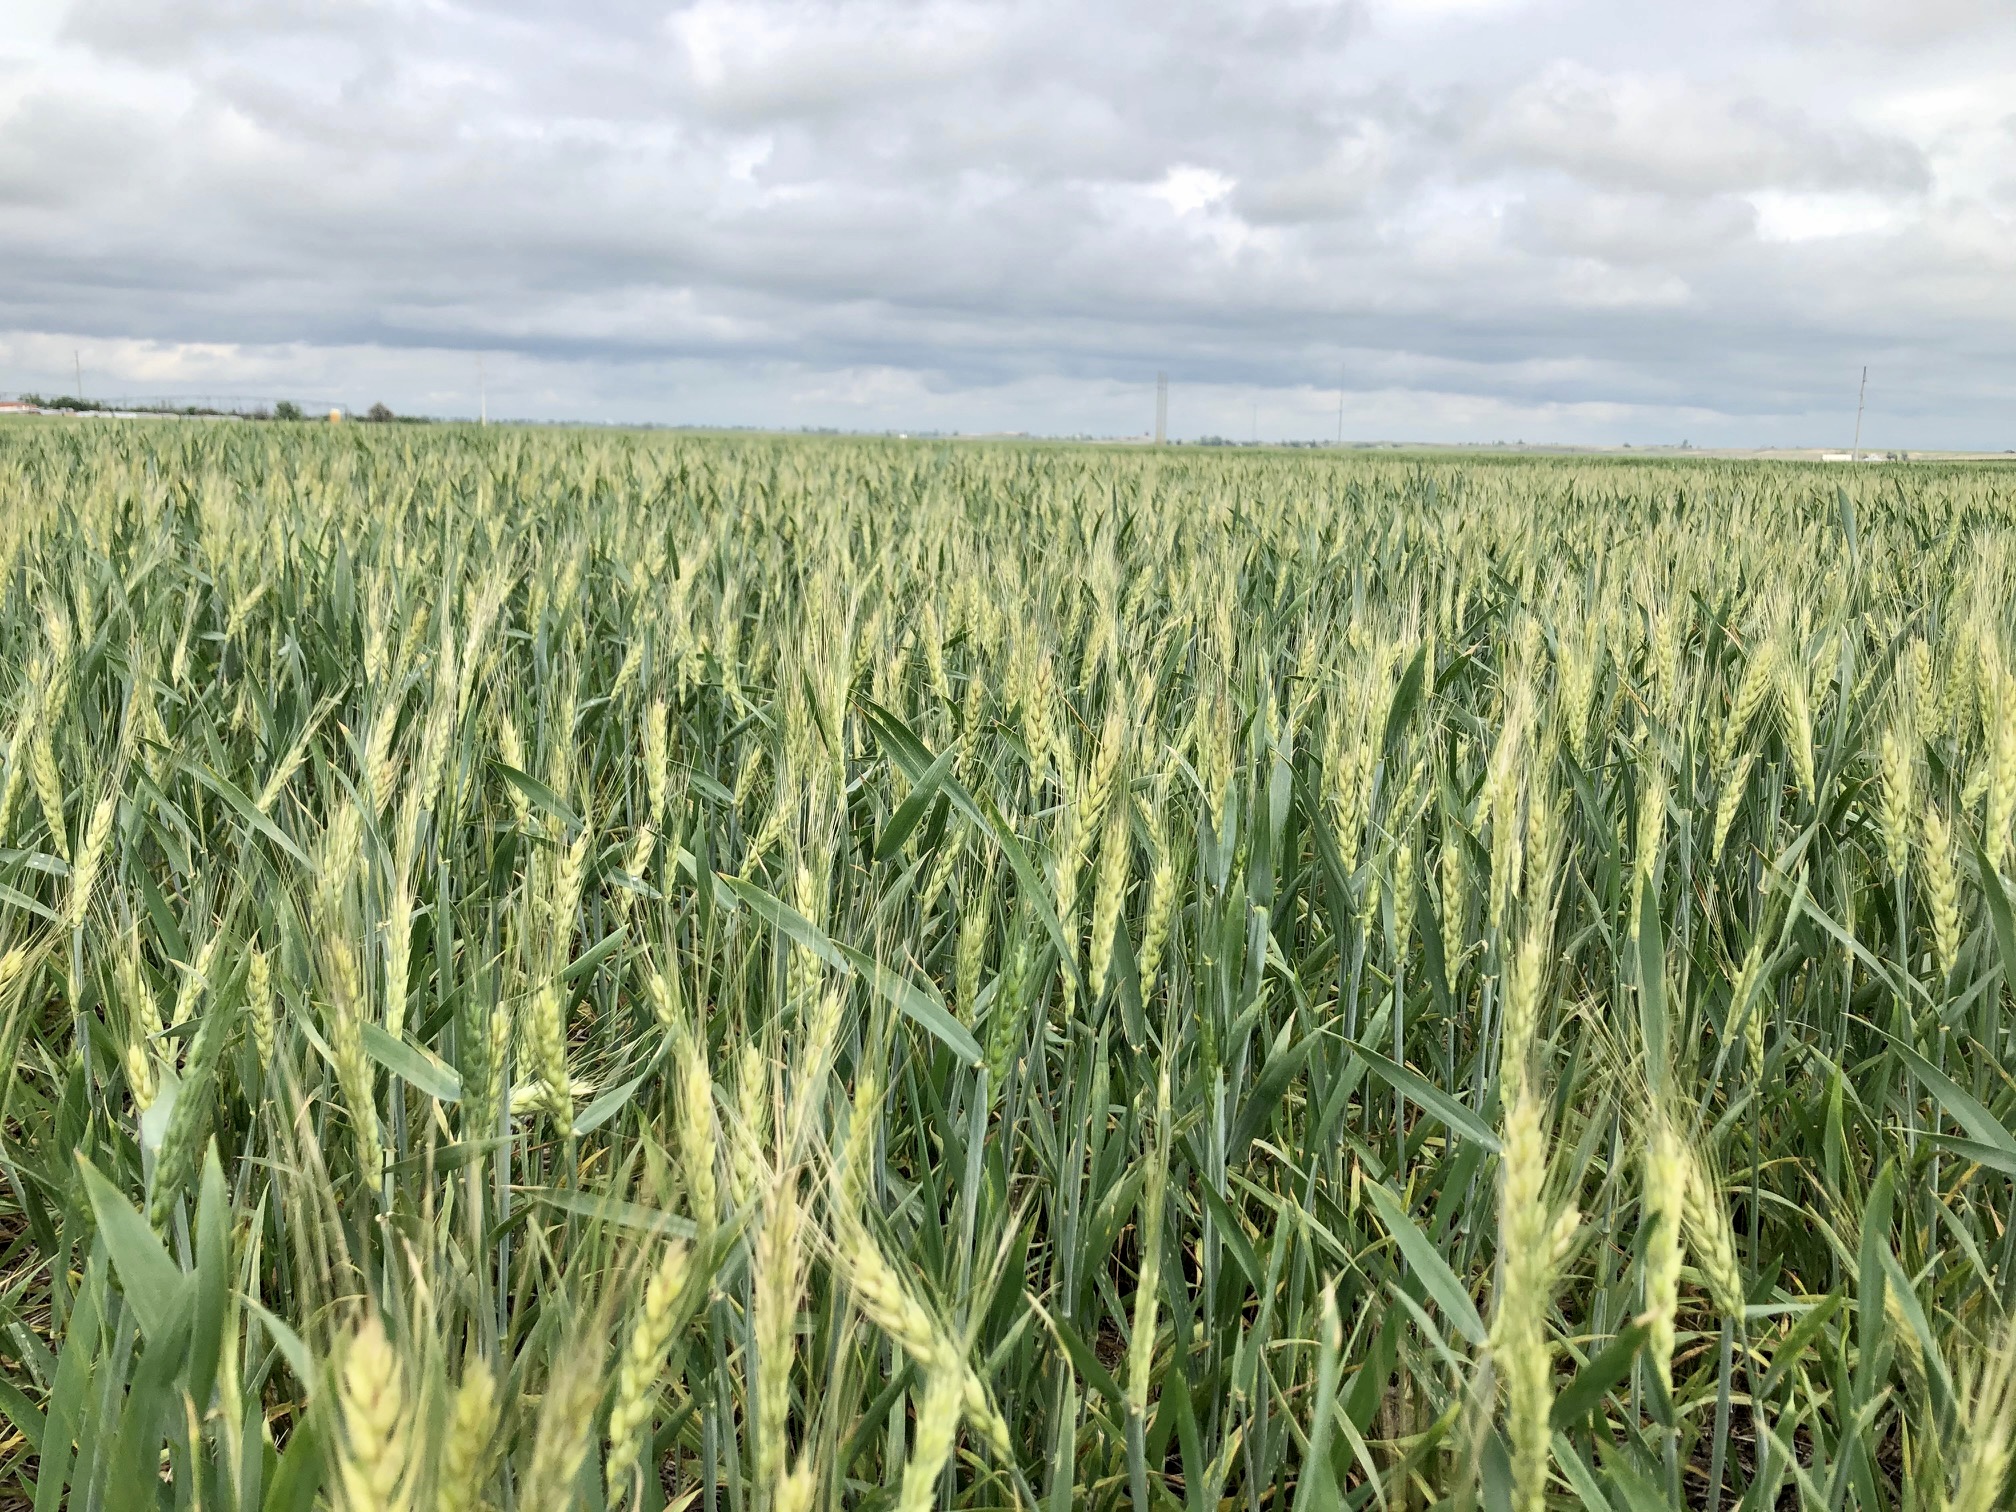 Freeze Damage Showing Up in Oklahoma Wheat Fields- But Does Not Appear to be Widespread